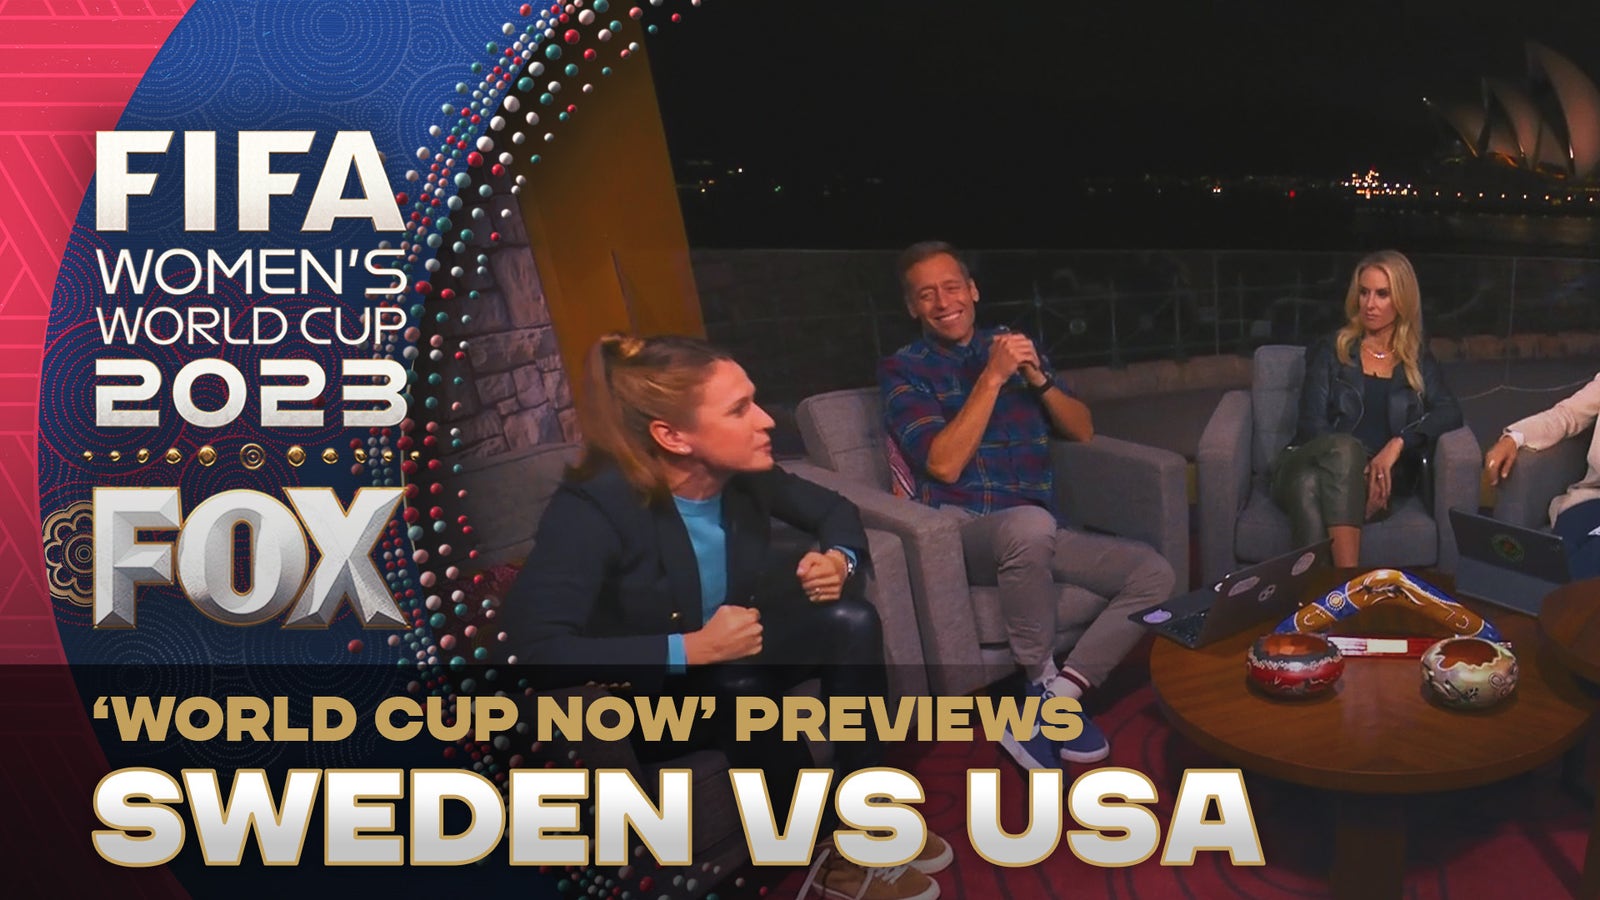 Sweden vs. United States preview from World Cup NOW